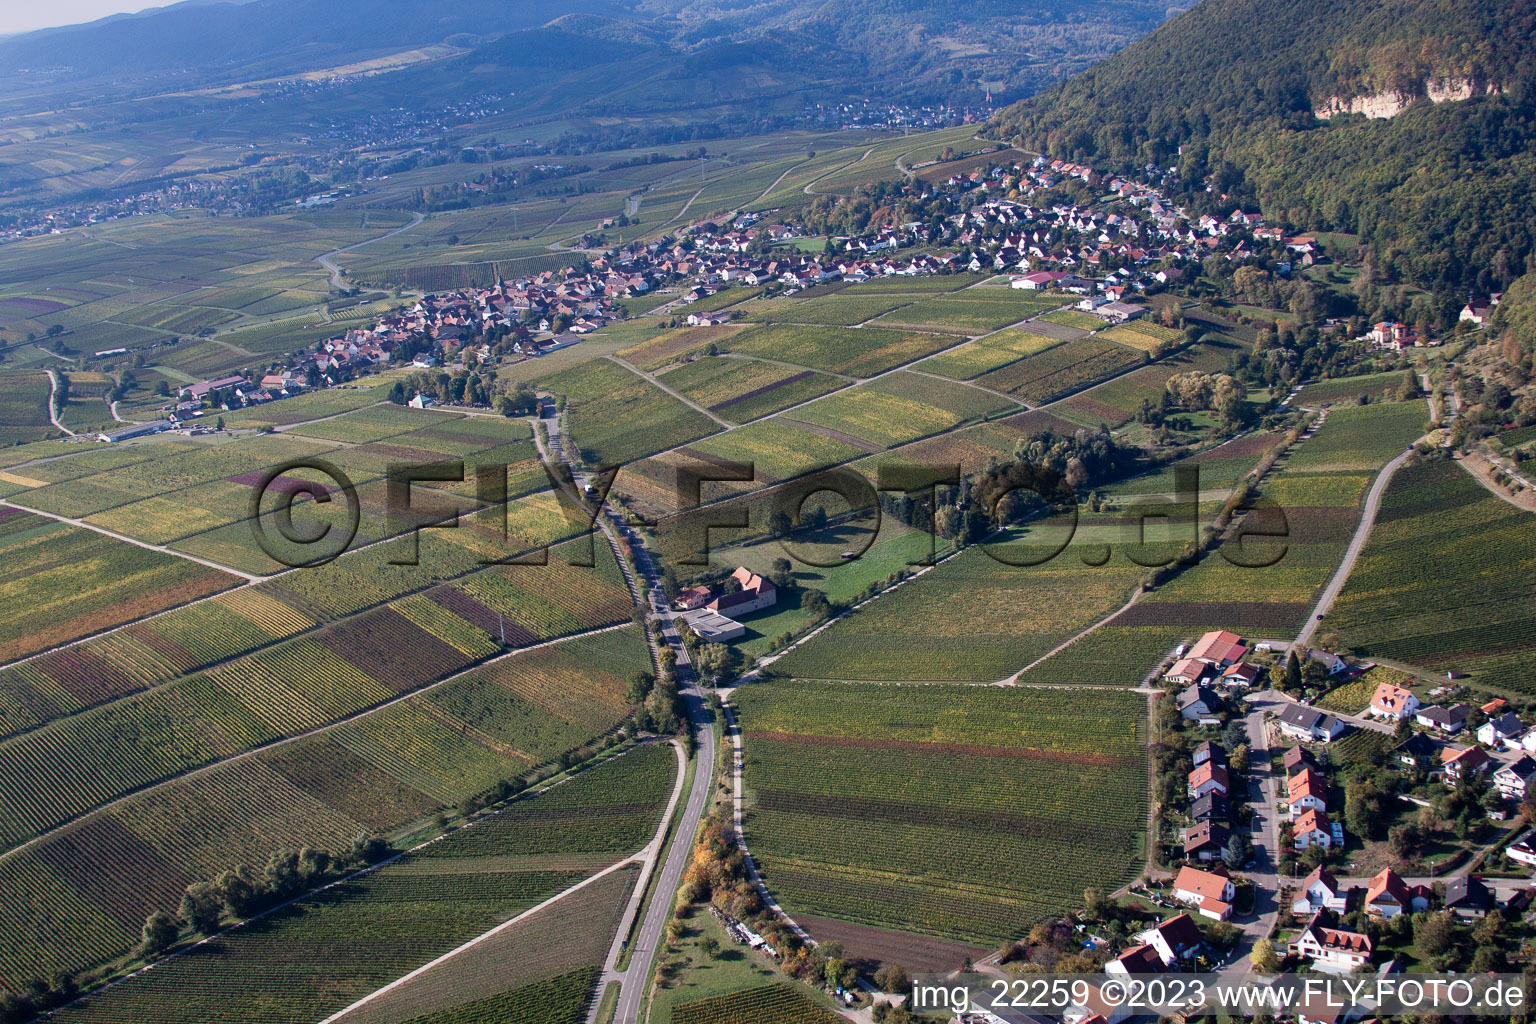 Bird's eye view of Frankweiler in the state Rhineland-Palatinate, Germany